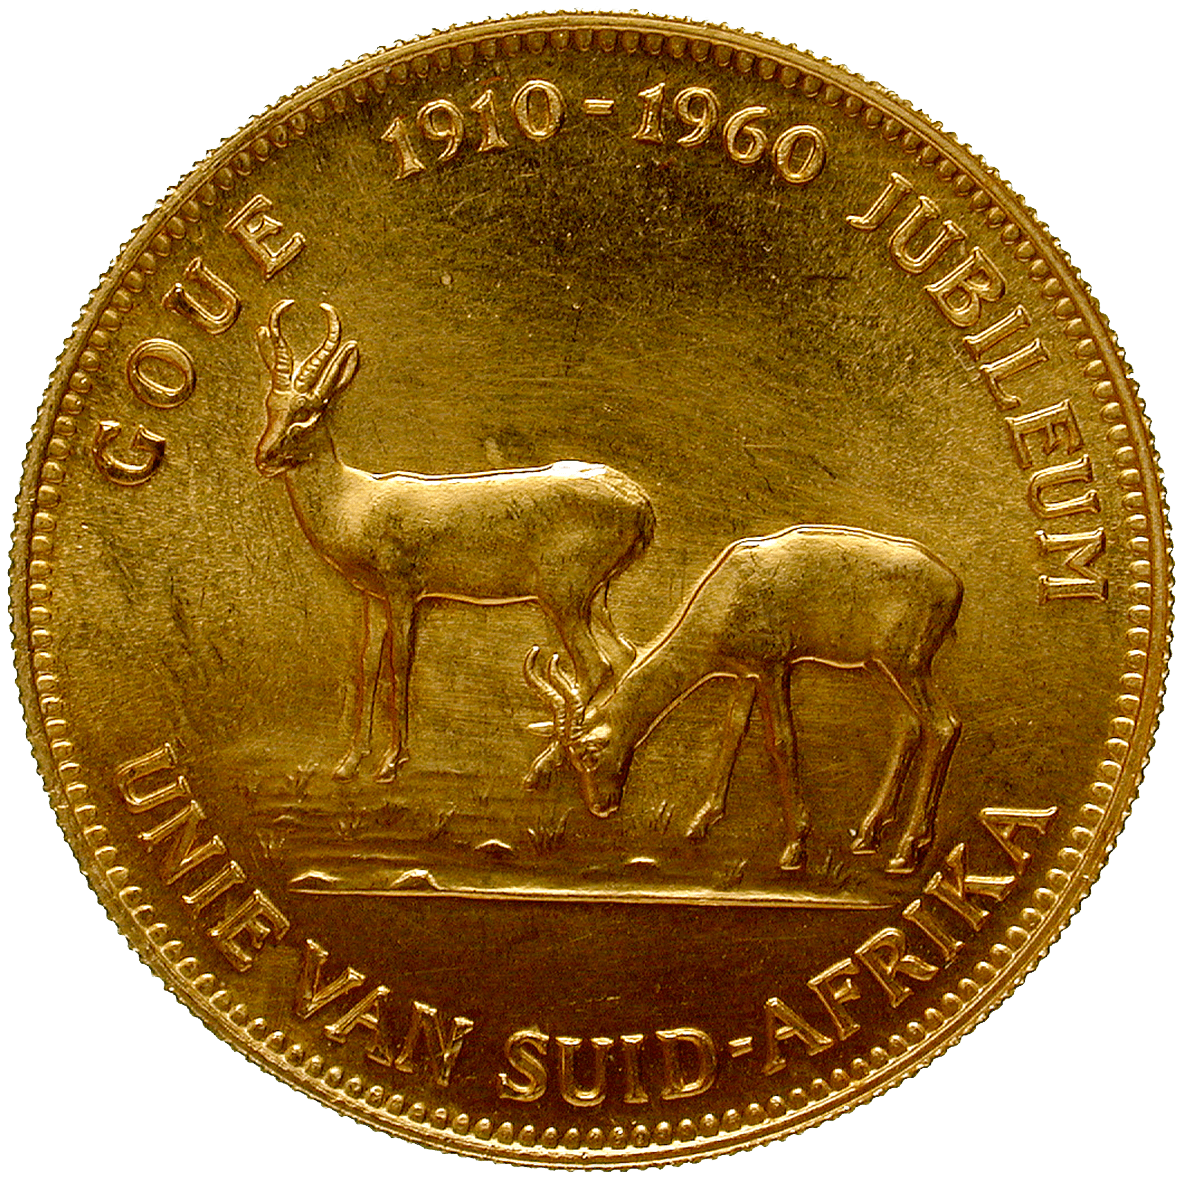 Republic of South Africa, Jubilee-Medal 1910-1960 (obverse)